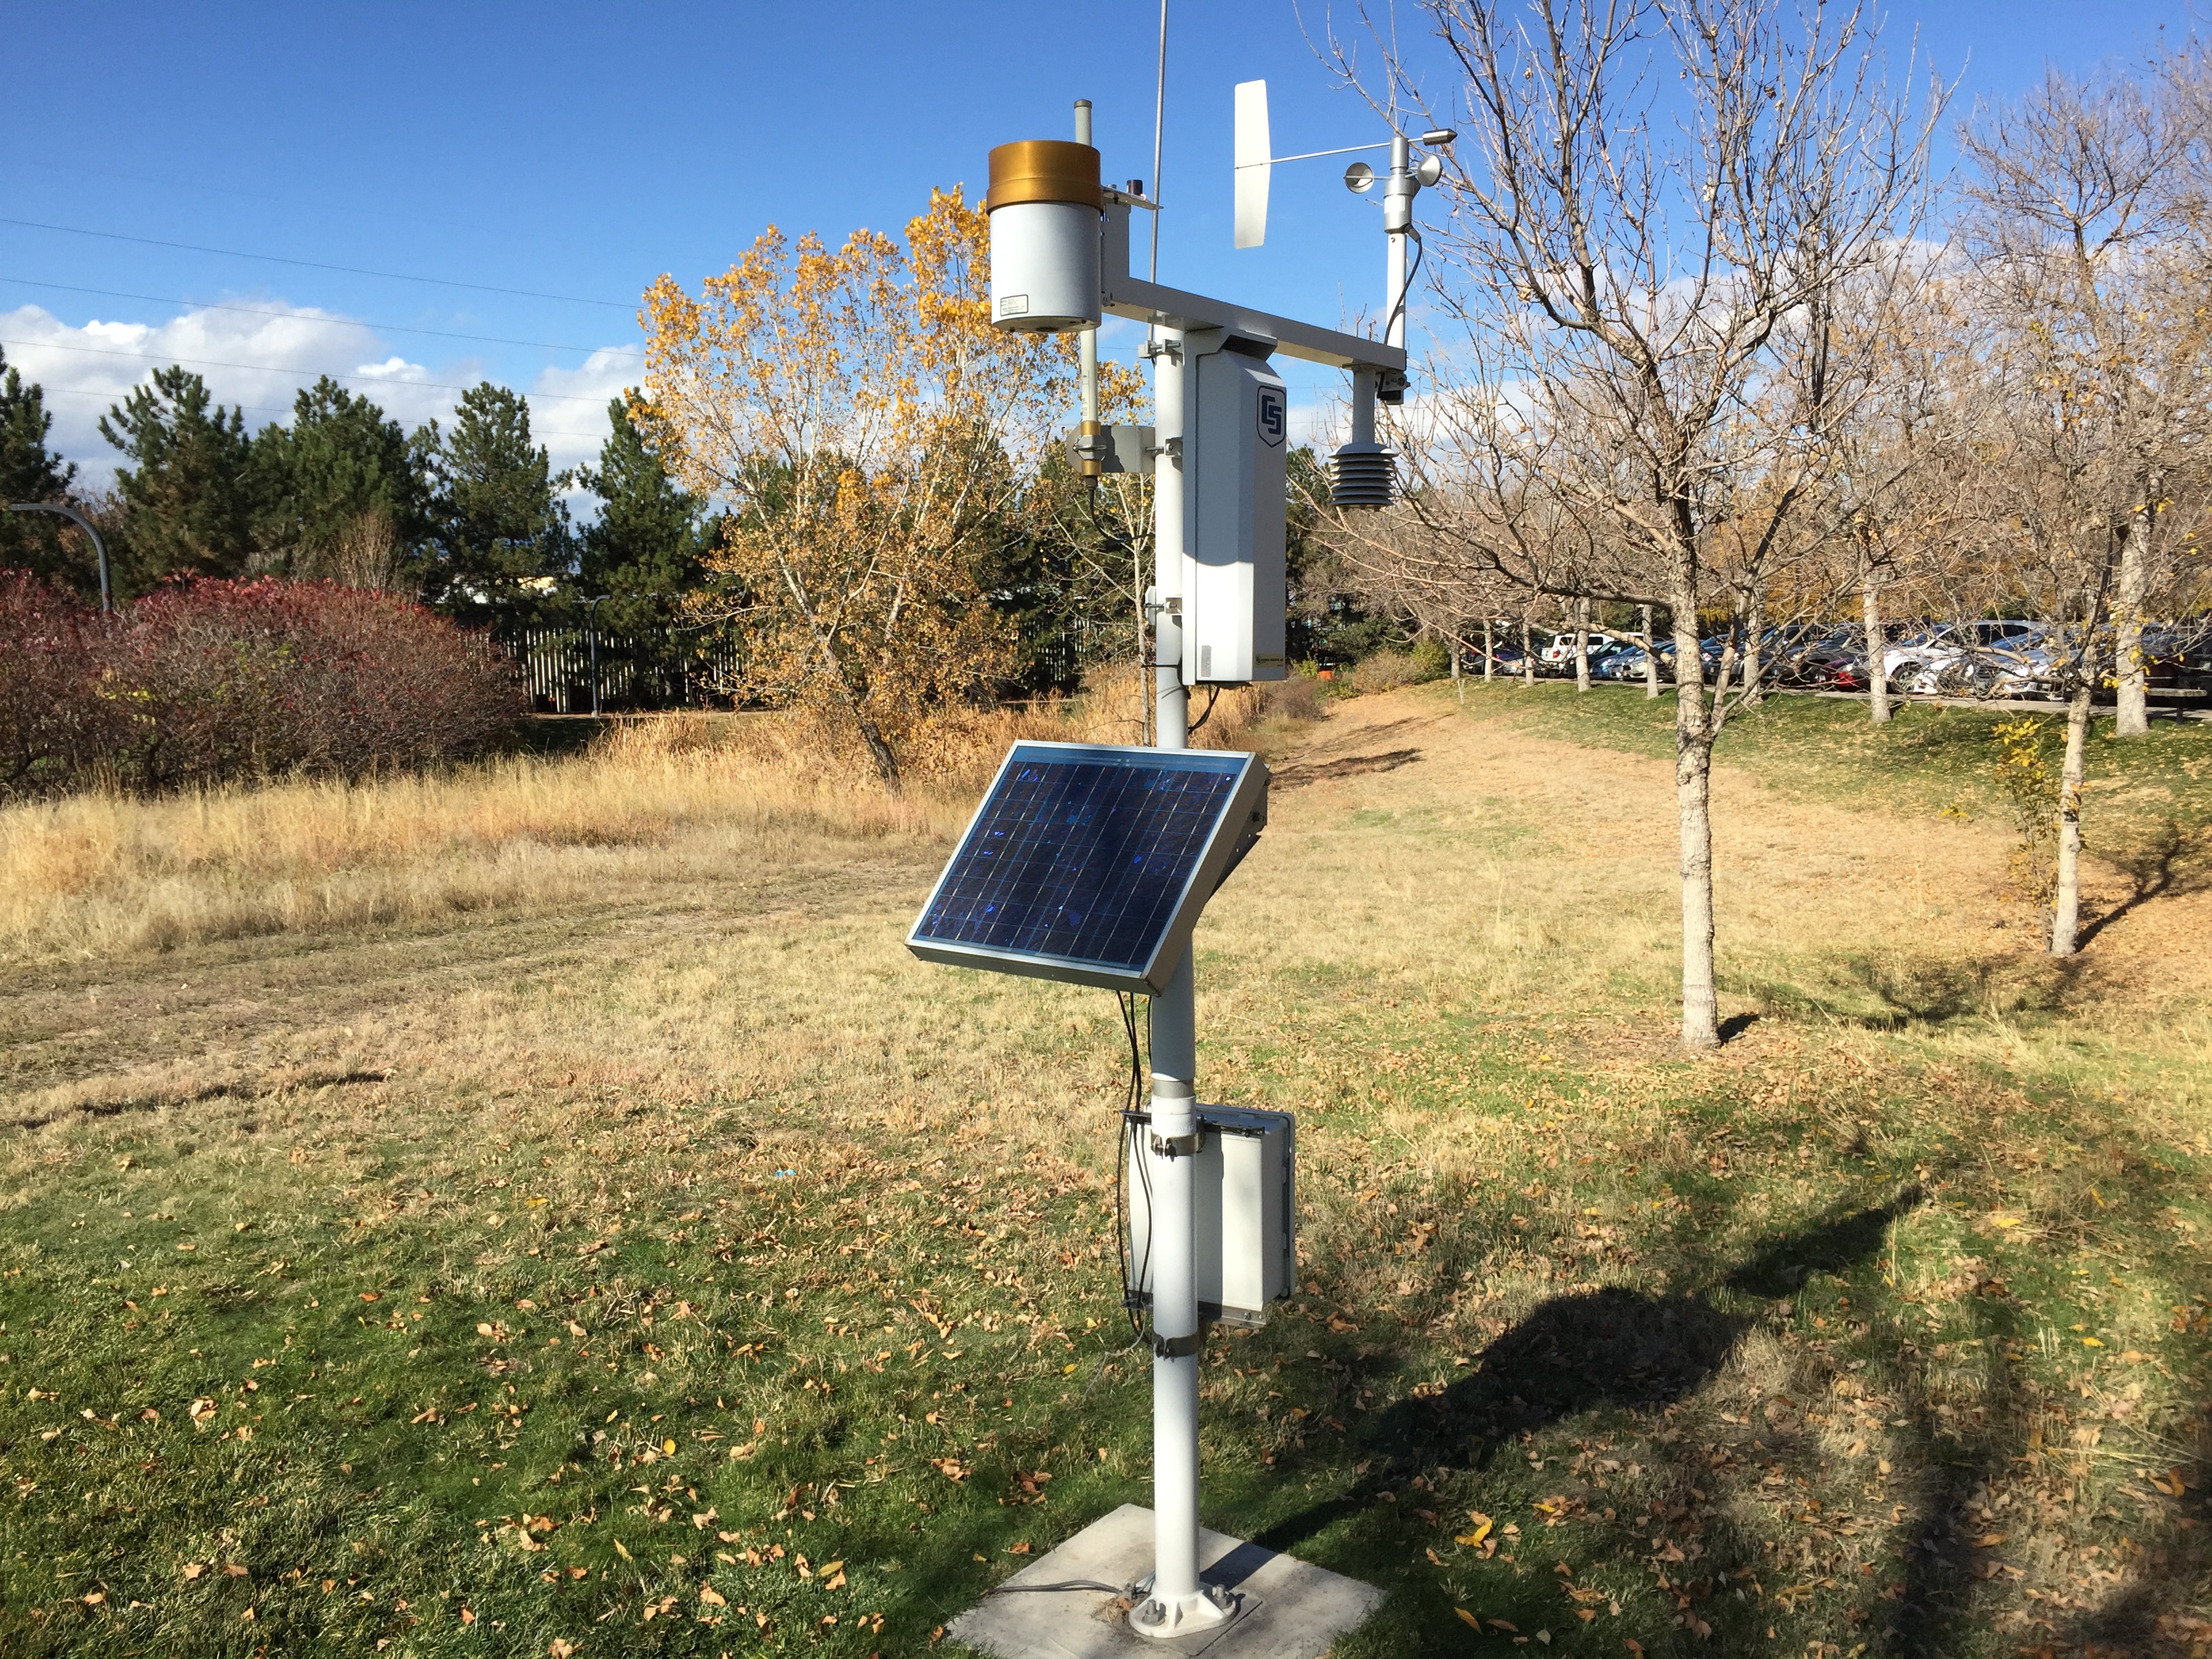 The National Weather Service uses a weather station like this one to record Denver’s official temperature, wind and precipitation measurements